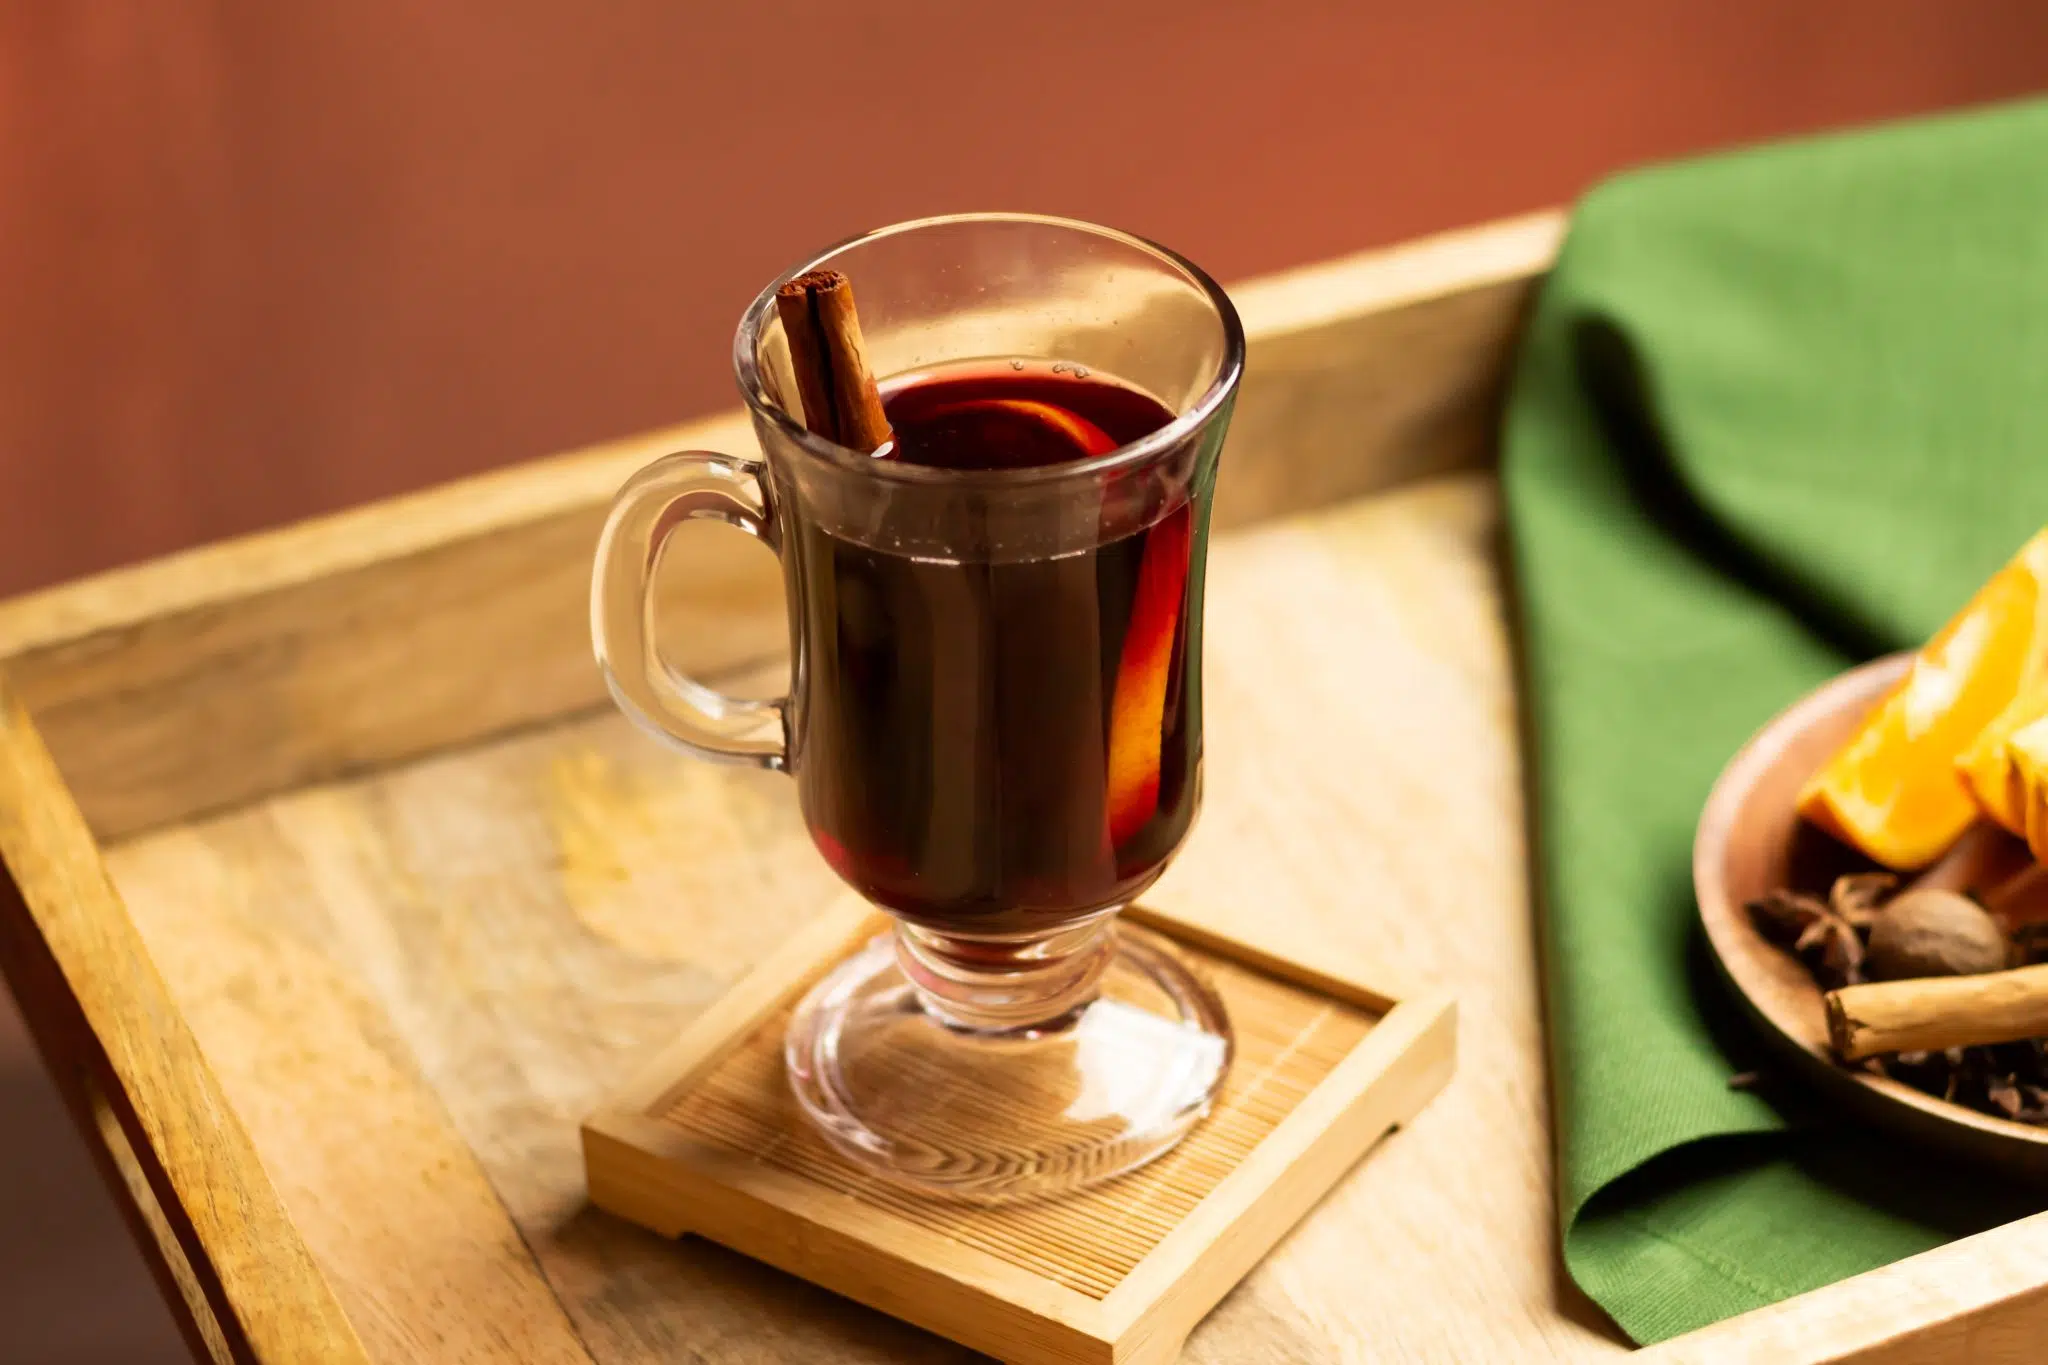 A side shot of a Mulled Wine cocktail in a mug on a wooden coaster placed on a wooden tray surrounded bya green cloth and a plate with orange wedges, cinnamon stick, and star anise